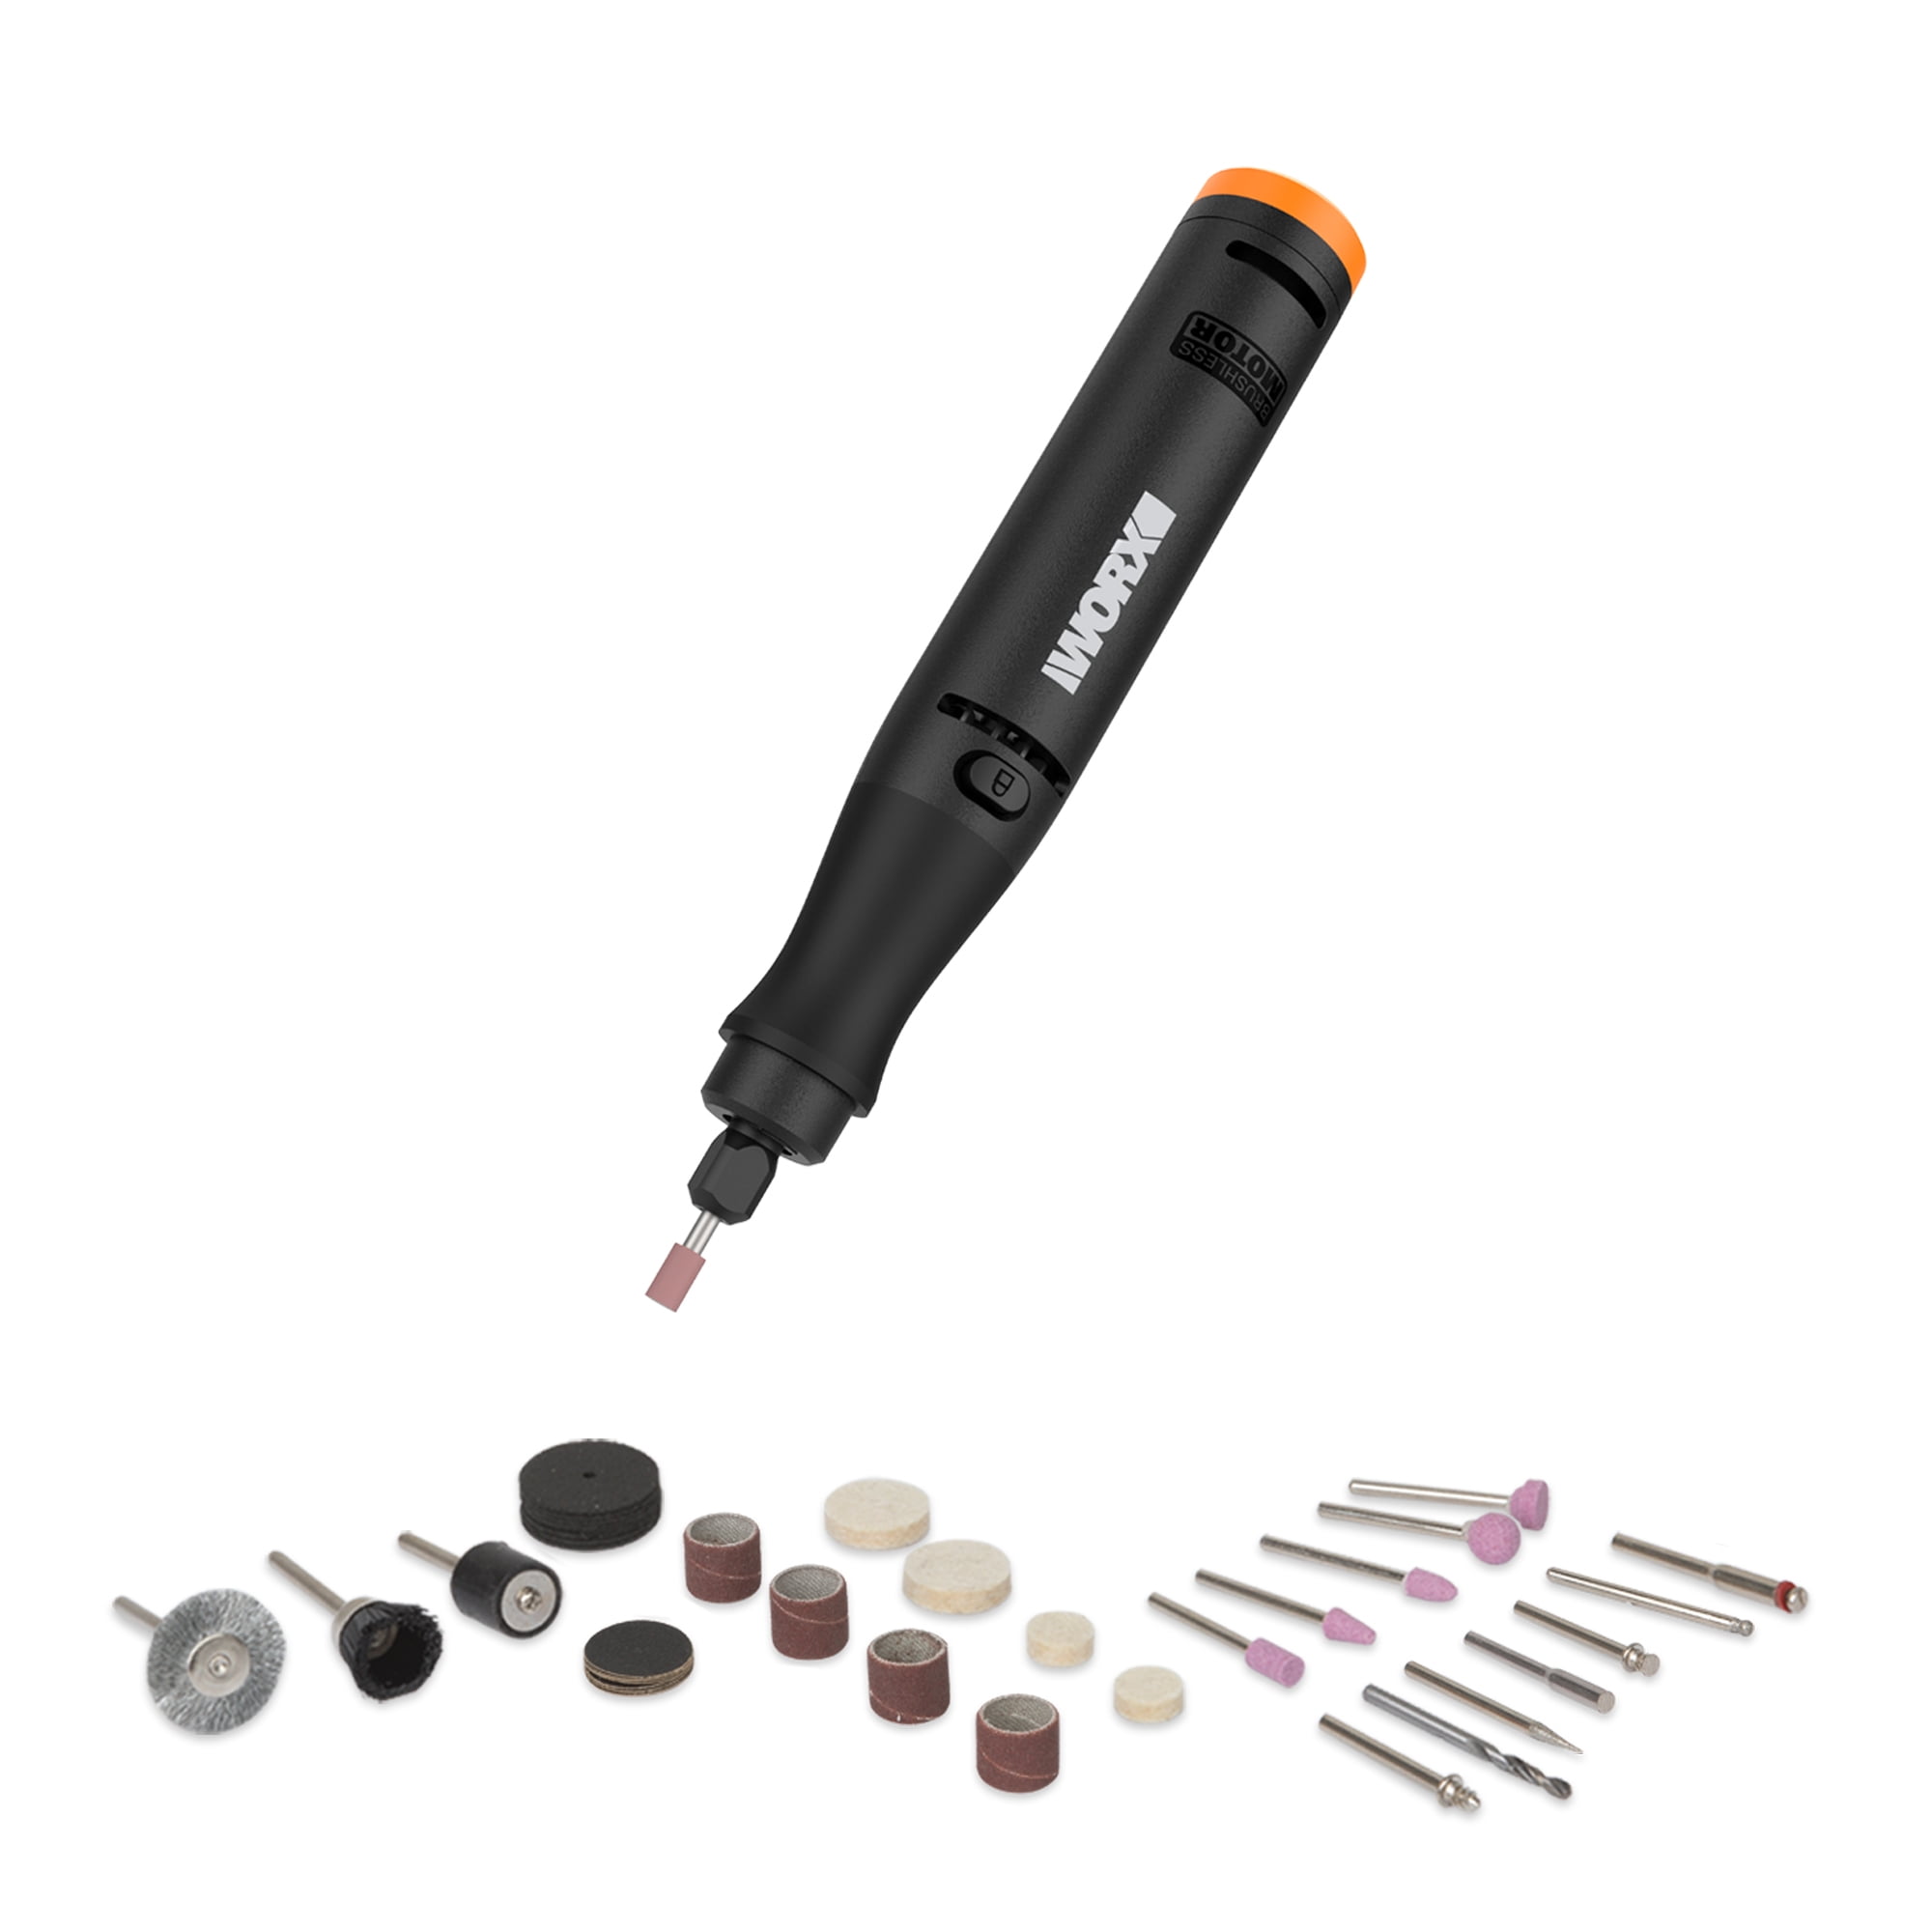 WORX 20V MakerX Power Share Kit with Rotary Tool, Grinder and Soldering  Iron Wood Burner at Tractor Supply Co.